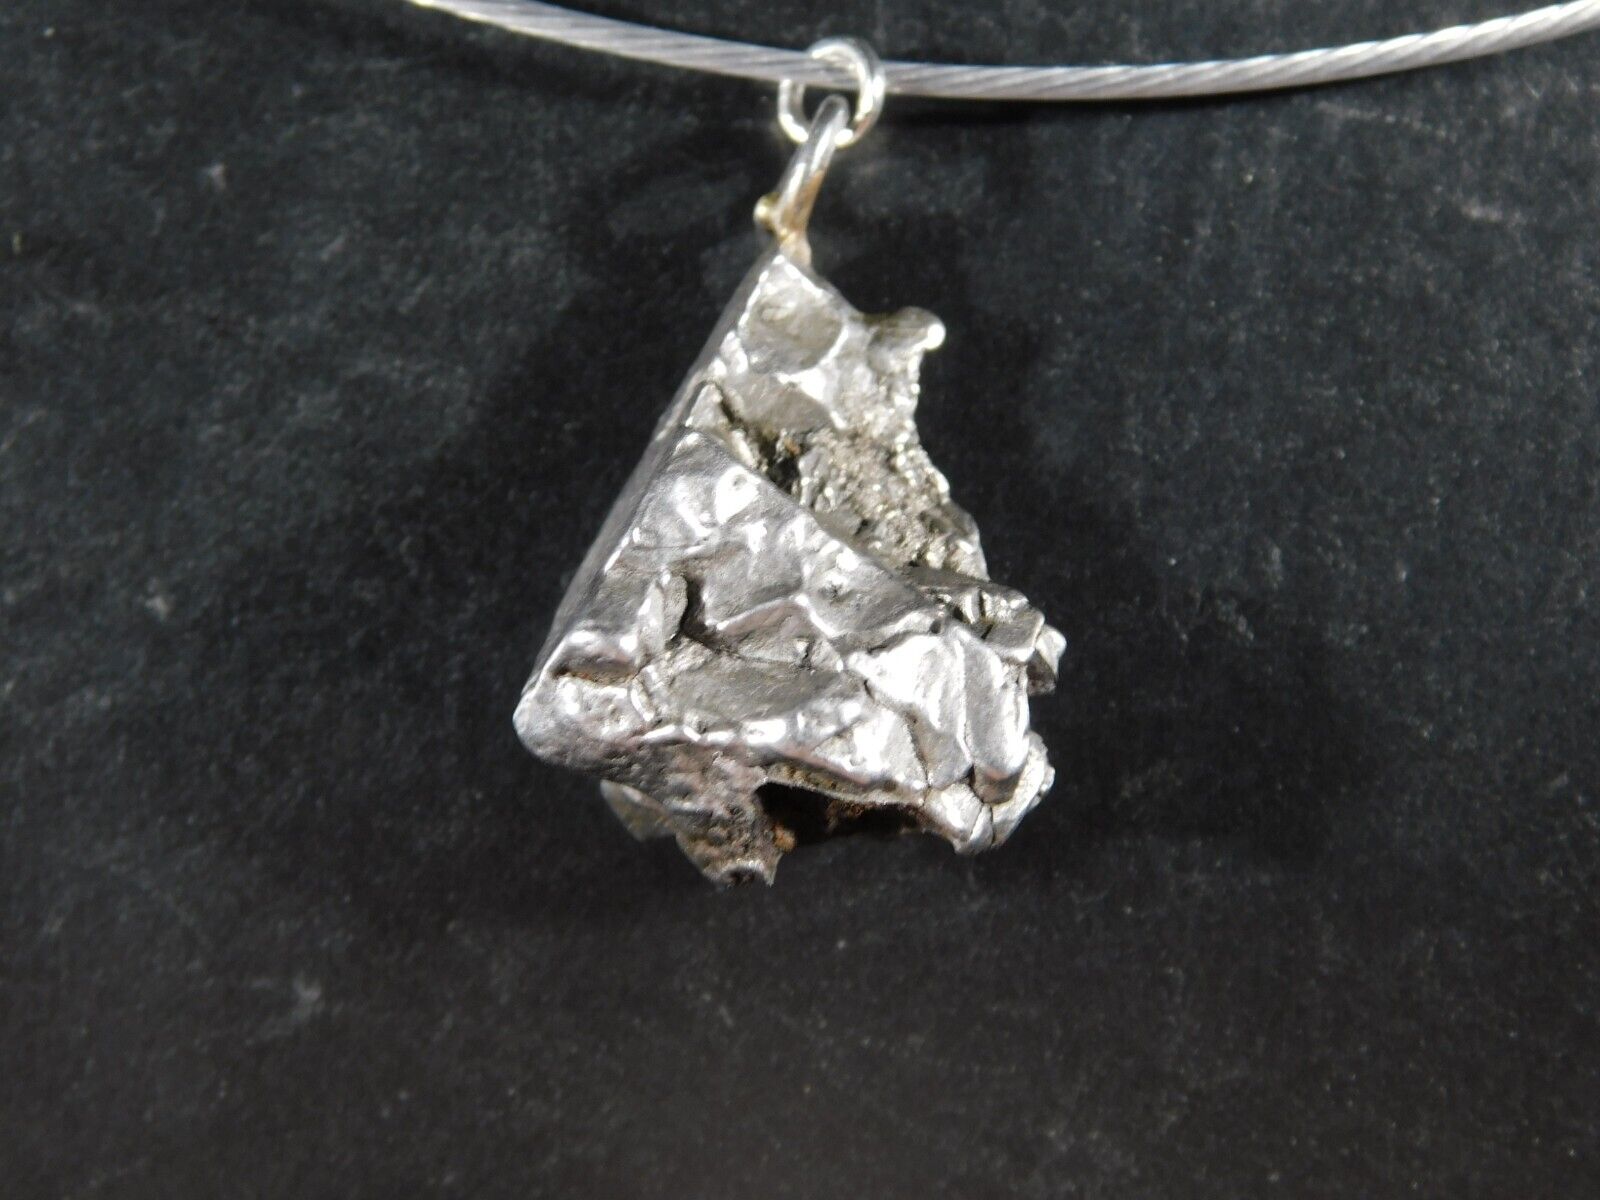 Authentic Meteorite Pendant or Necklace...a Falling Star 3.92